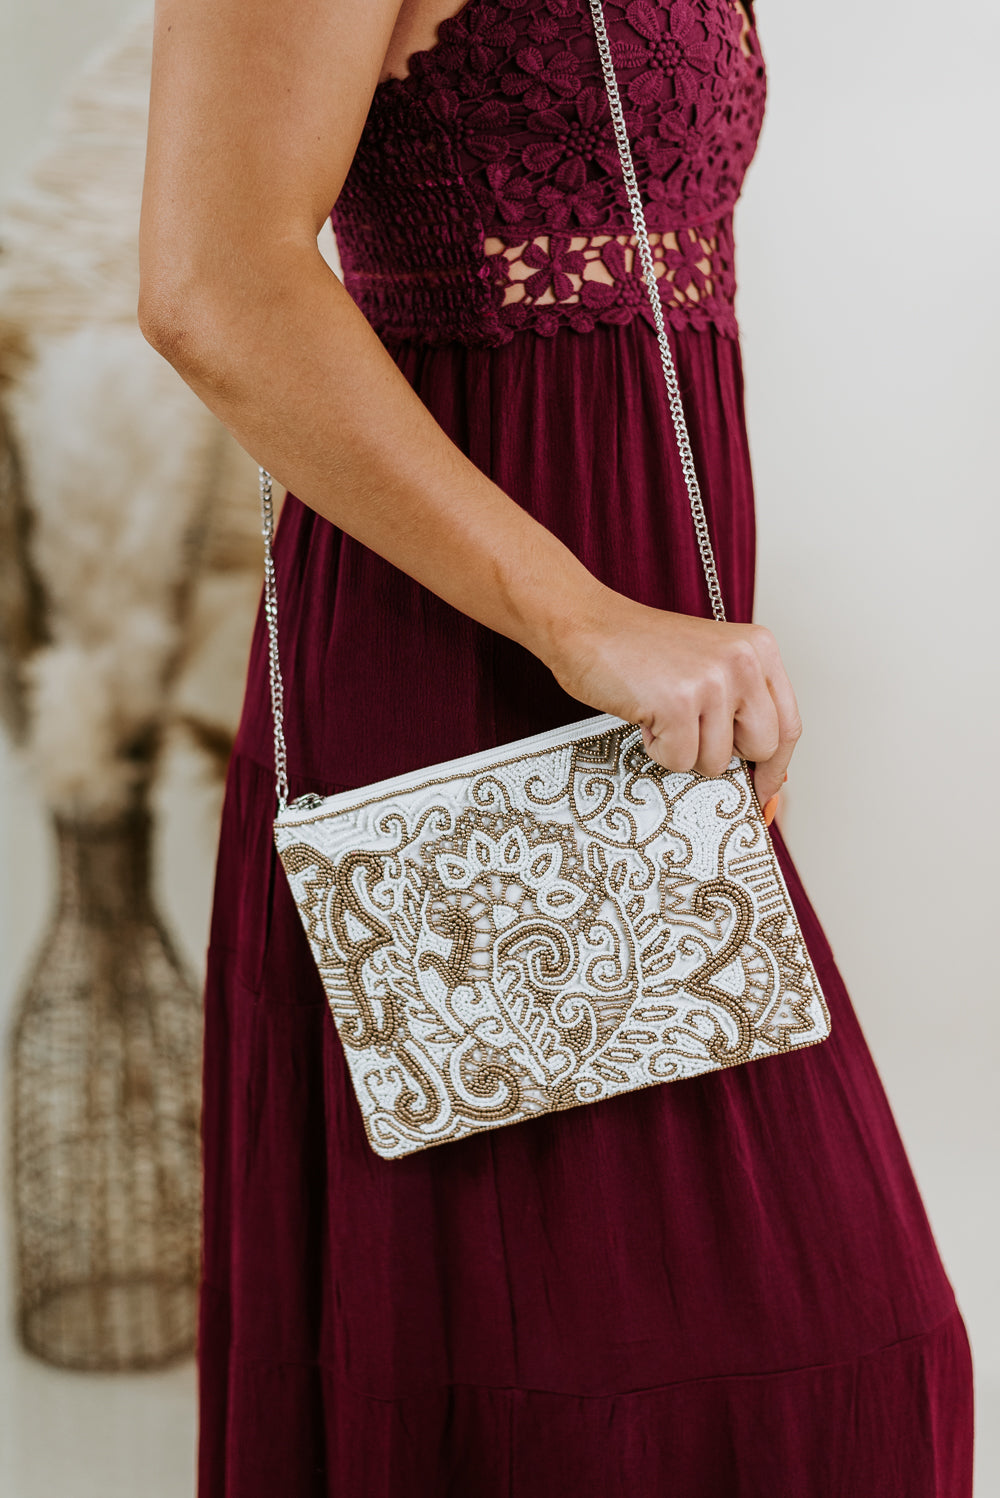 Floral Embroidery Clutch, White